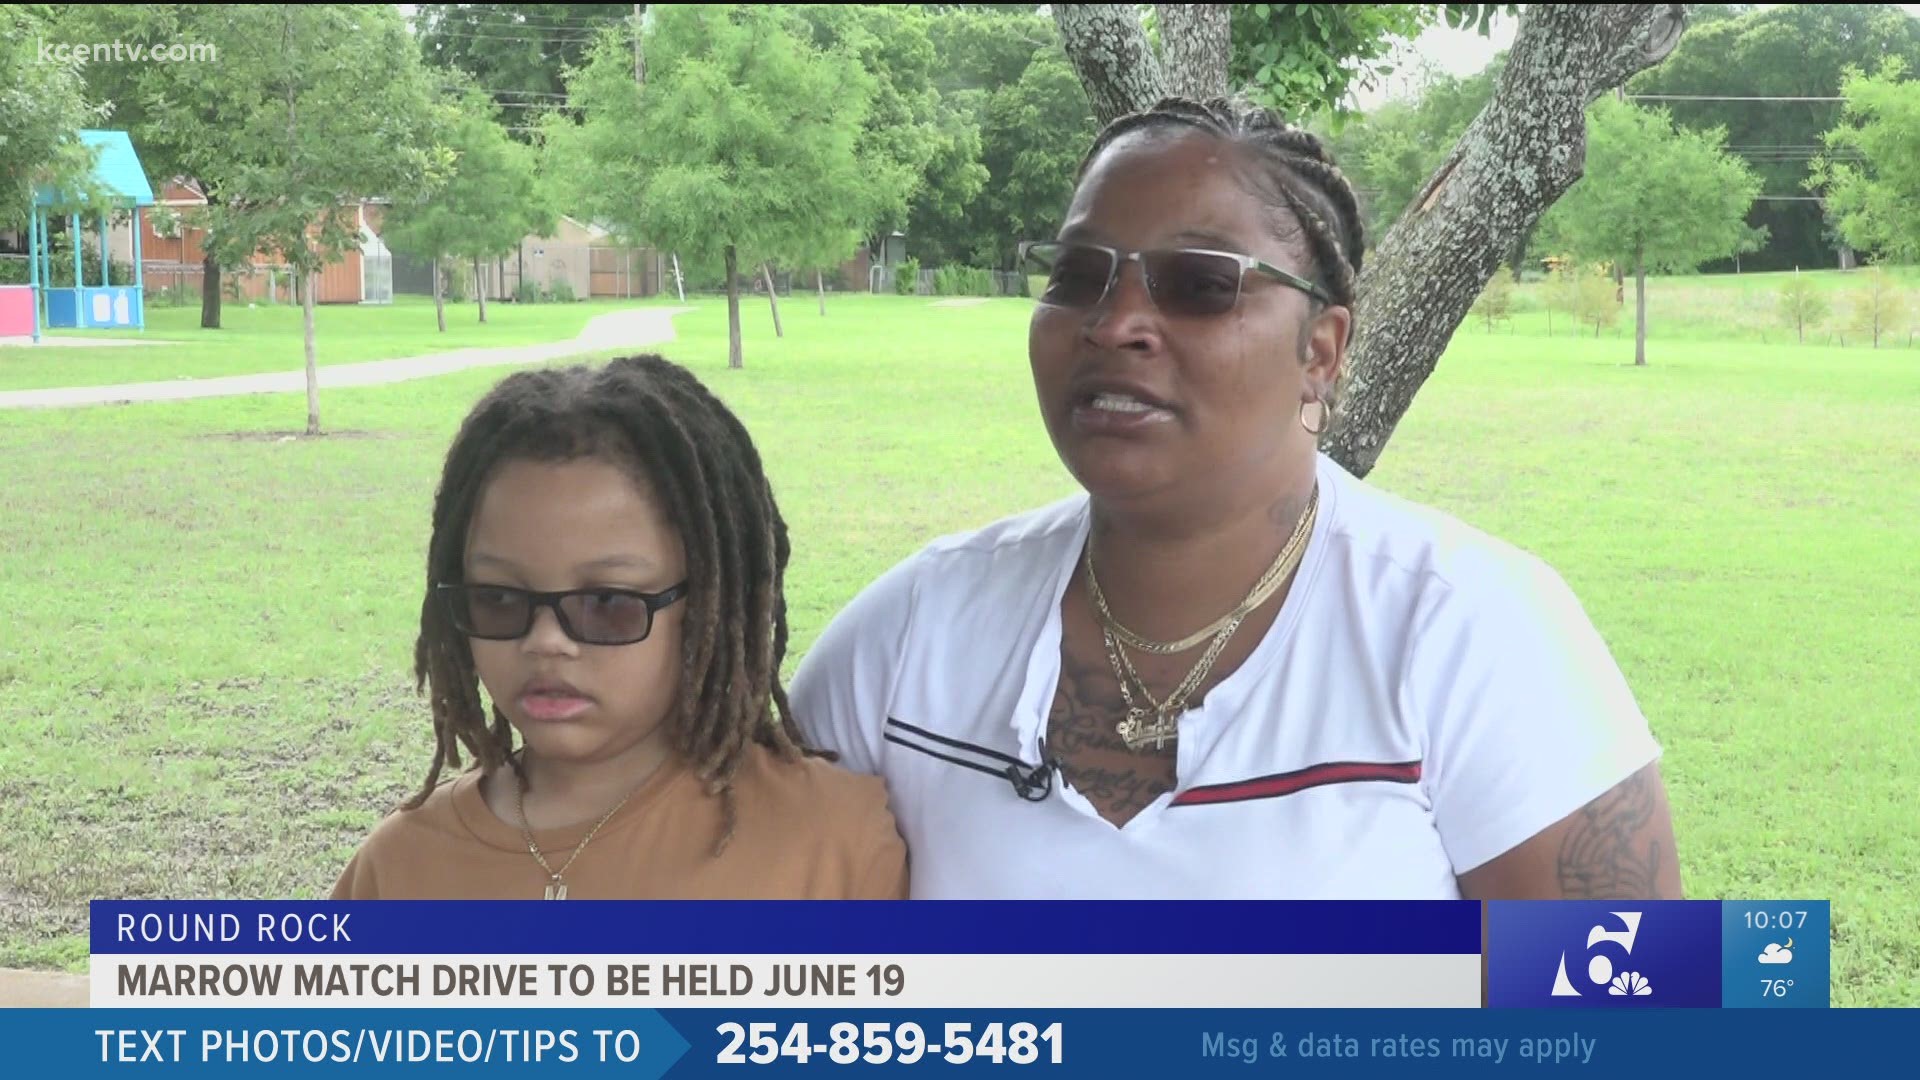 MJ Dixon has cancer in his bone marrow and is in need of a transplant. His mother plans to hold a bone marrow drive on June 19 to find a desperately needed match.